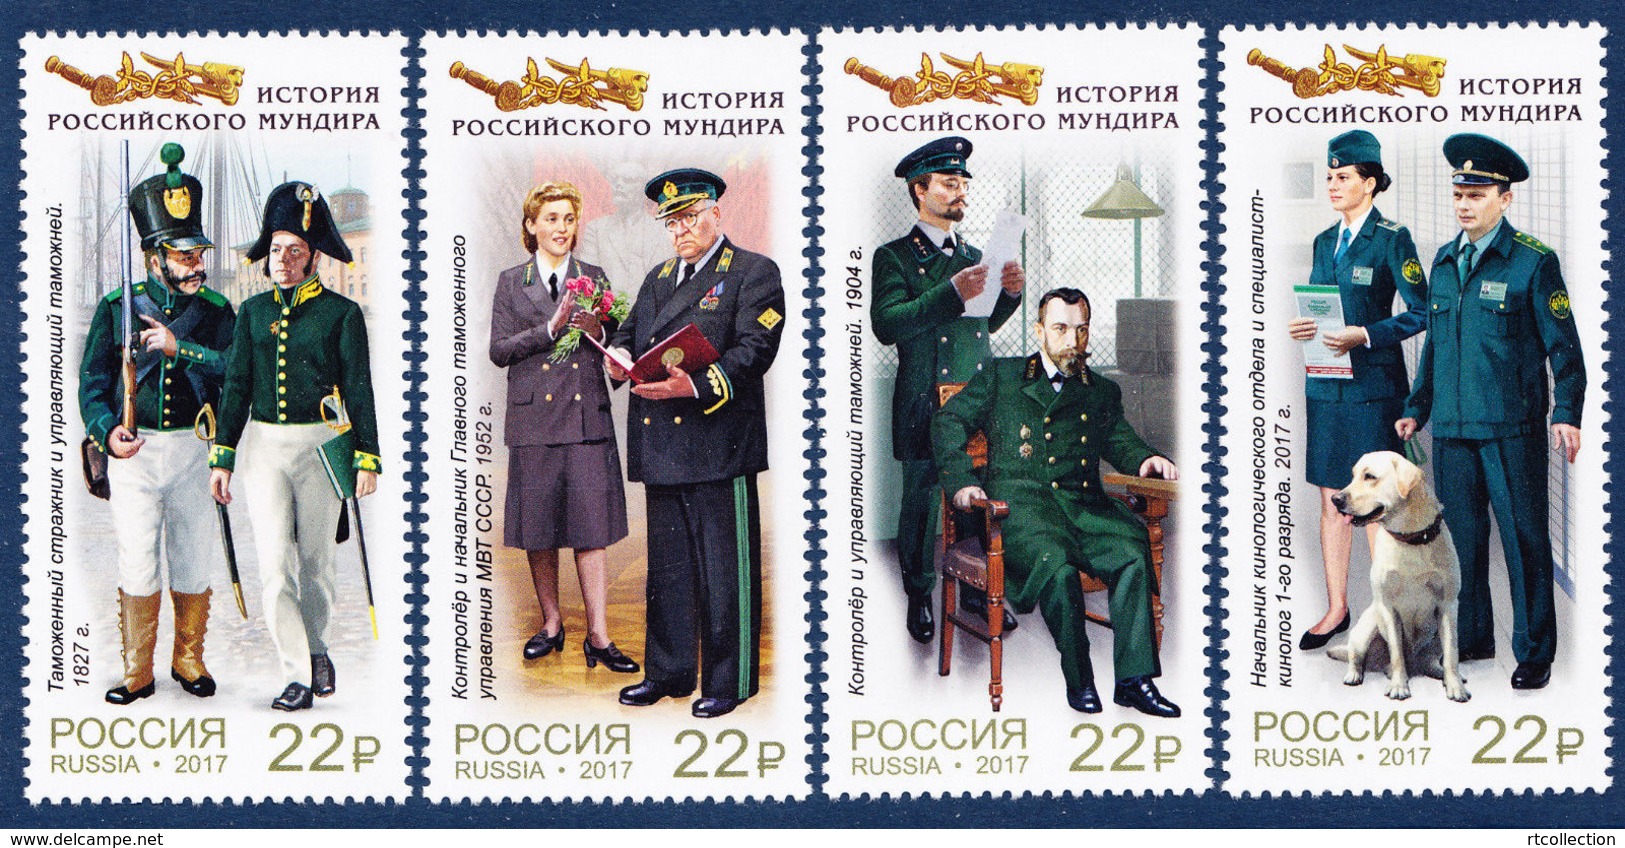 Russia 2017 A Set History Russian Uniform Jacket Diplomatic Customs Service Cloth Cultures Dogs Stamps MNH Mi 2493-96 - Costumes